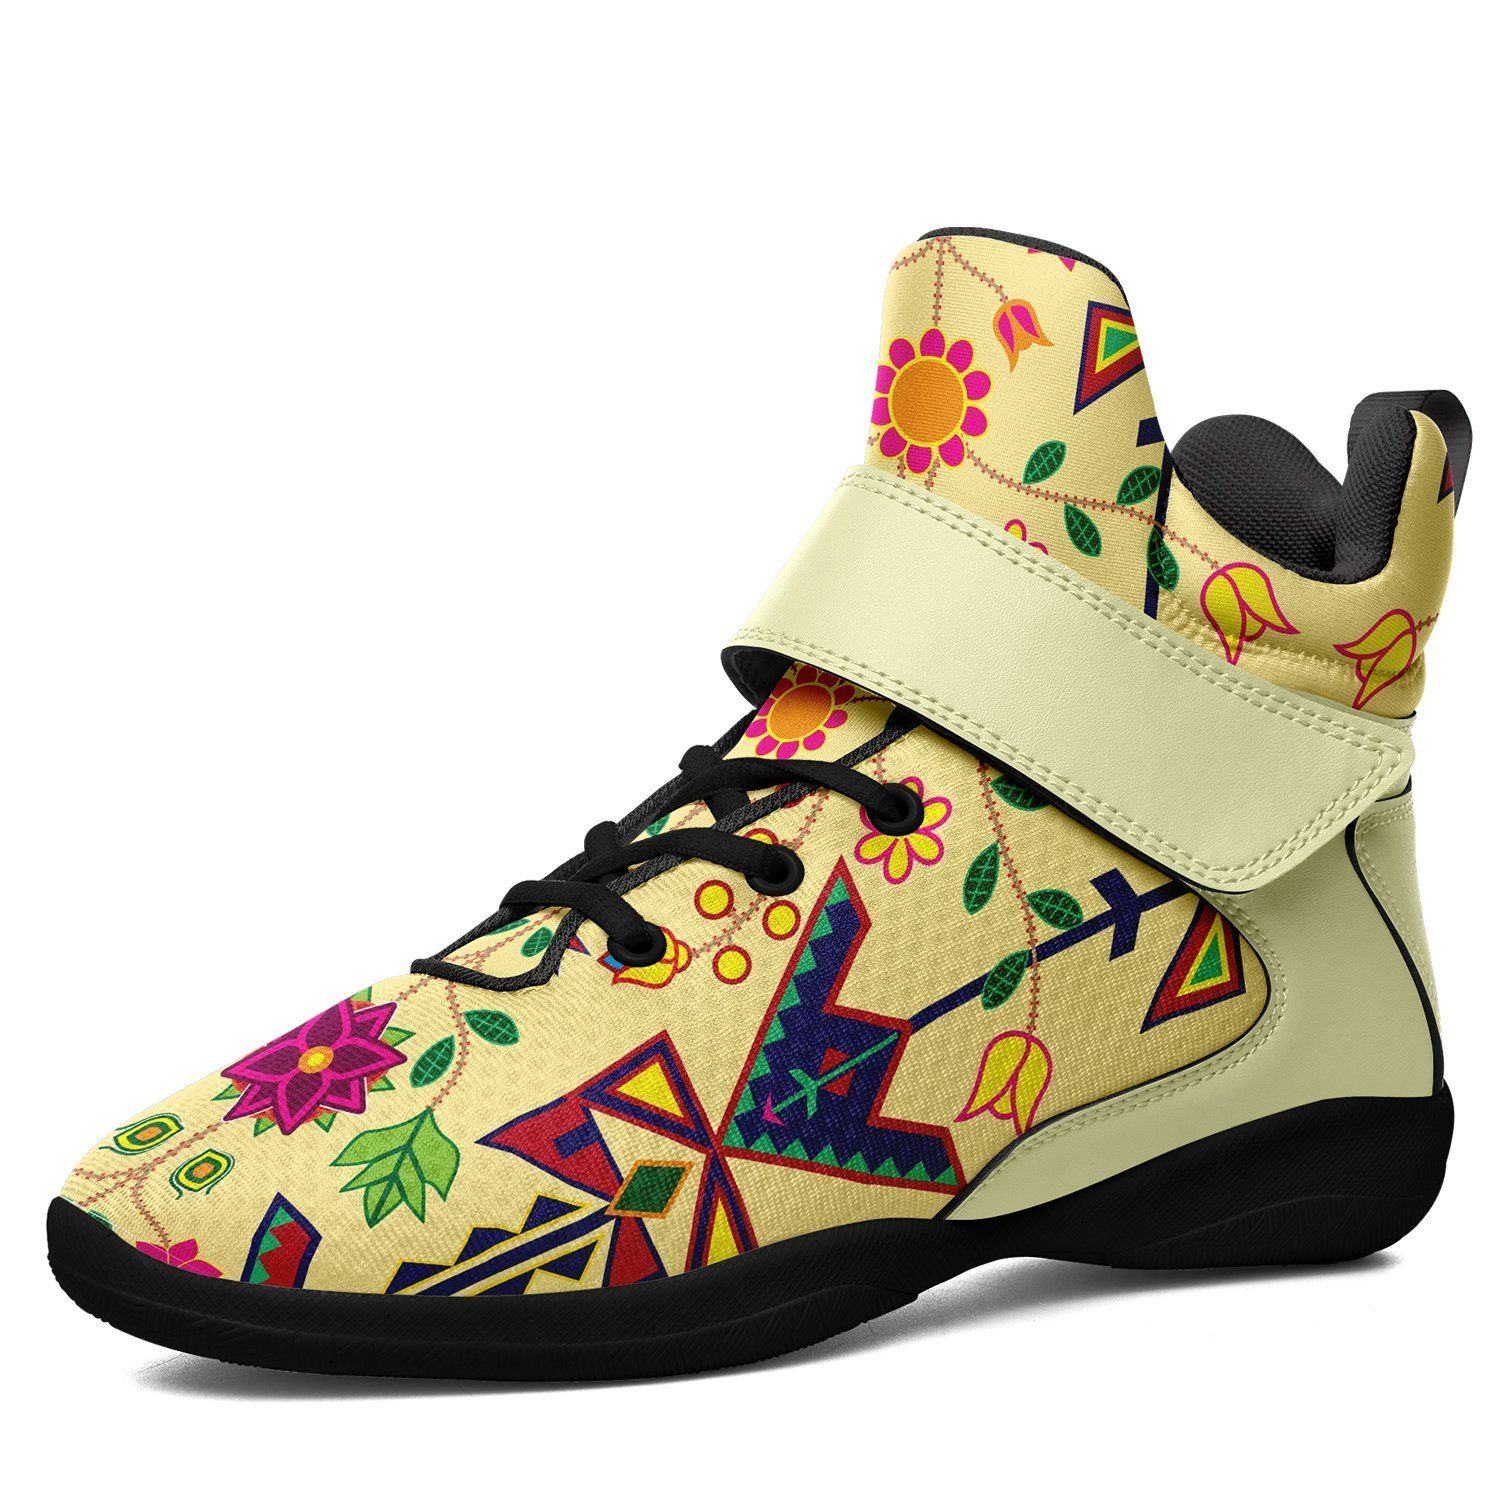 Geometric Floral Spring Vanilla Ipottaa Basketball / Sport High Top Shoes - Black Sole 49 Dzine US Men 7 / EUR 40 Black Sole with Light Yellow Strap 